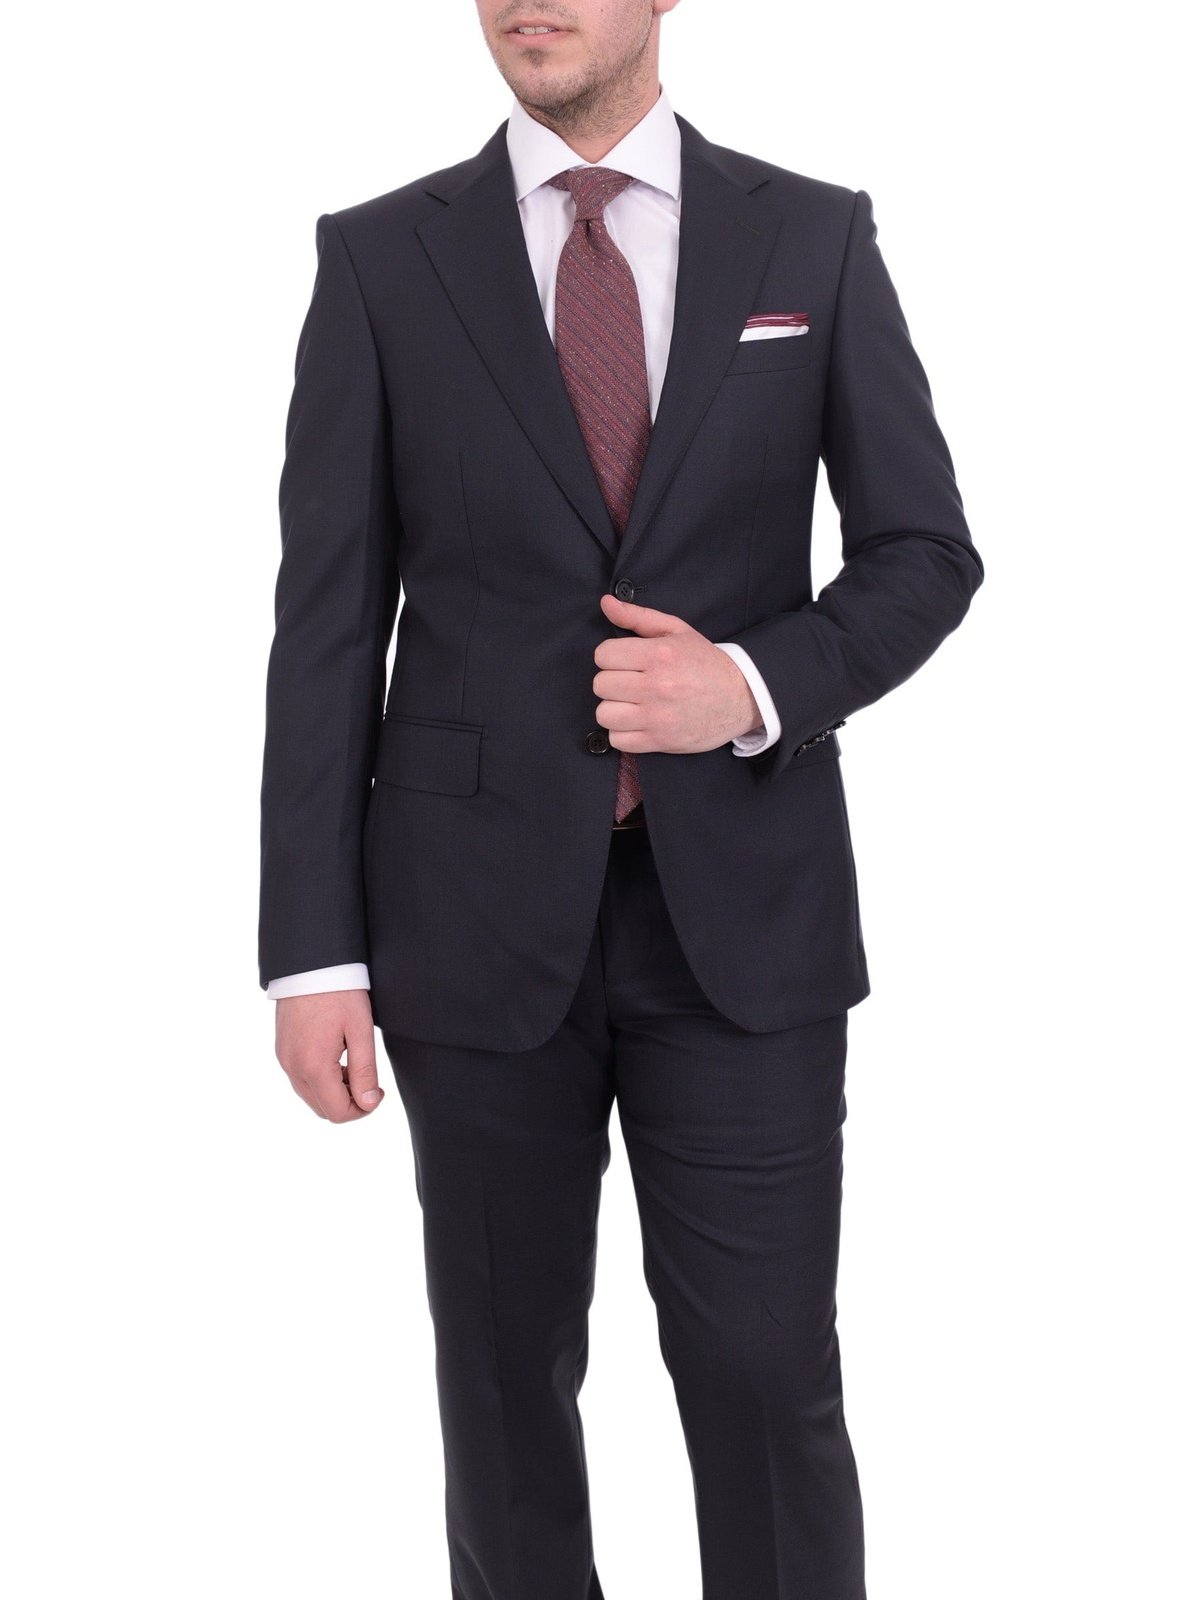 Napoli TWO PIECE SUITS Mens Napoli Slim Fit Solid Navy Blue Half Canvassed Marzotto Wool Suit